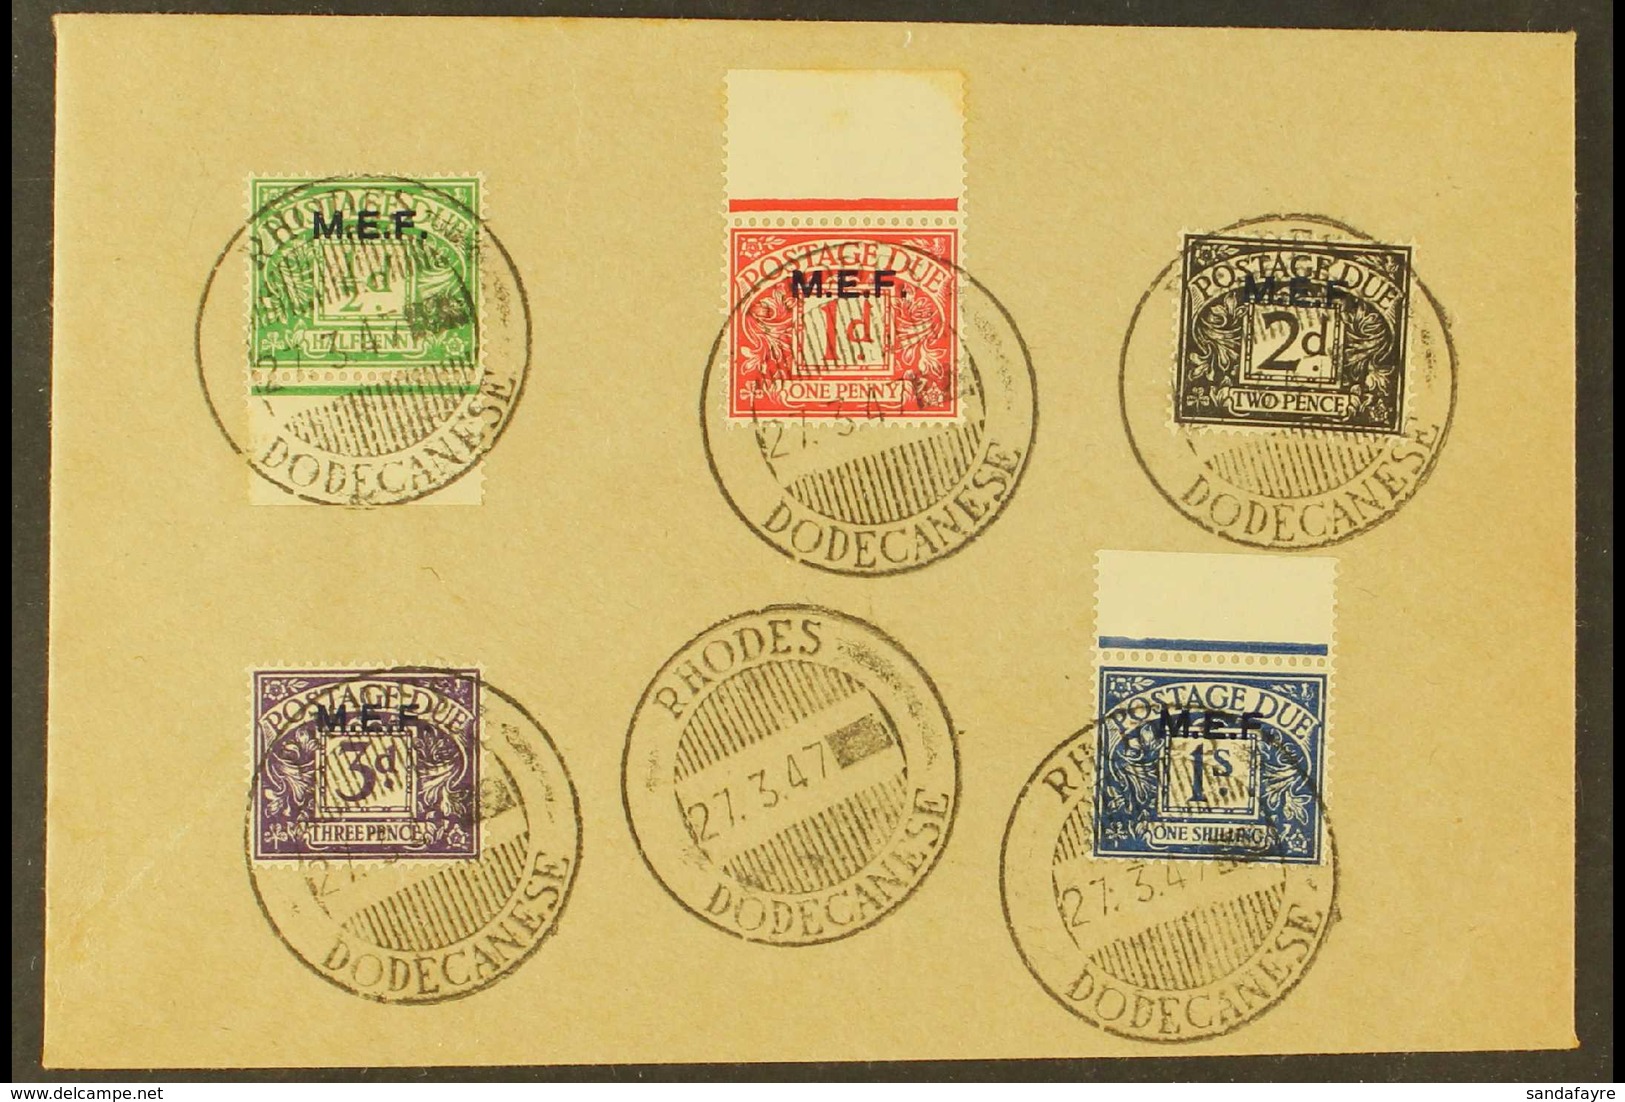 POSTAGE DUES 1942 "M.E.F." Overprints Complete Set (SG D1/5) On Unaddressed Philatelic Cover Tied By Superb "Rhodes / Do - Italian Eastern Africa